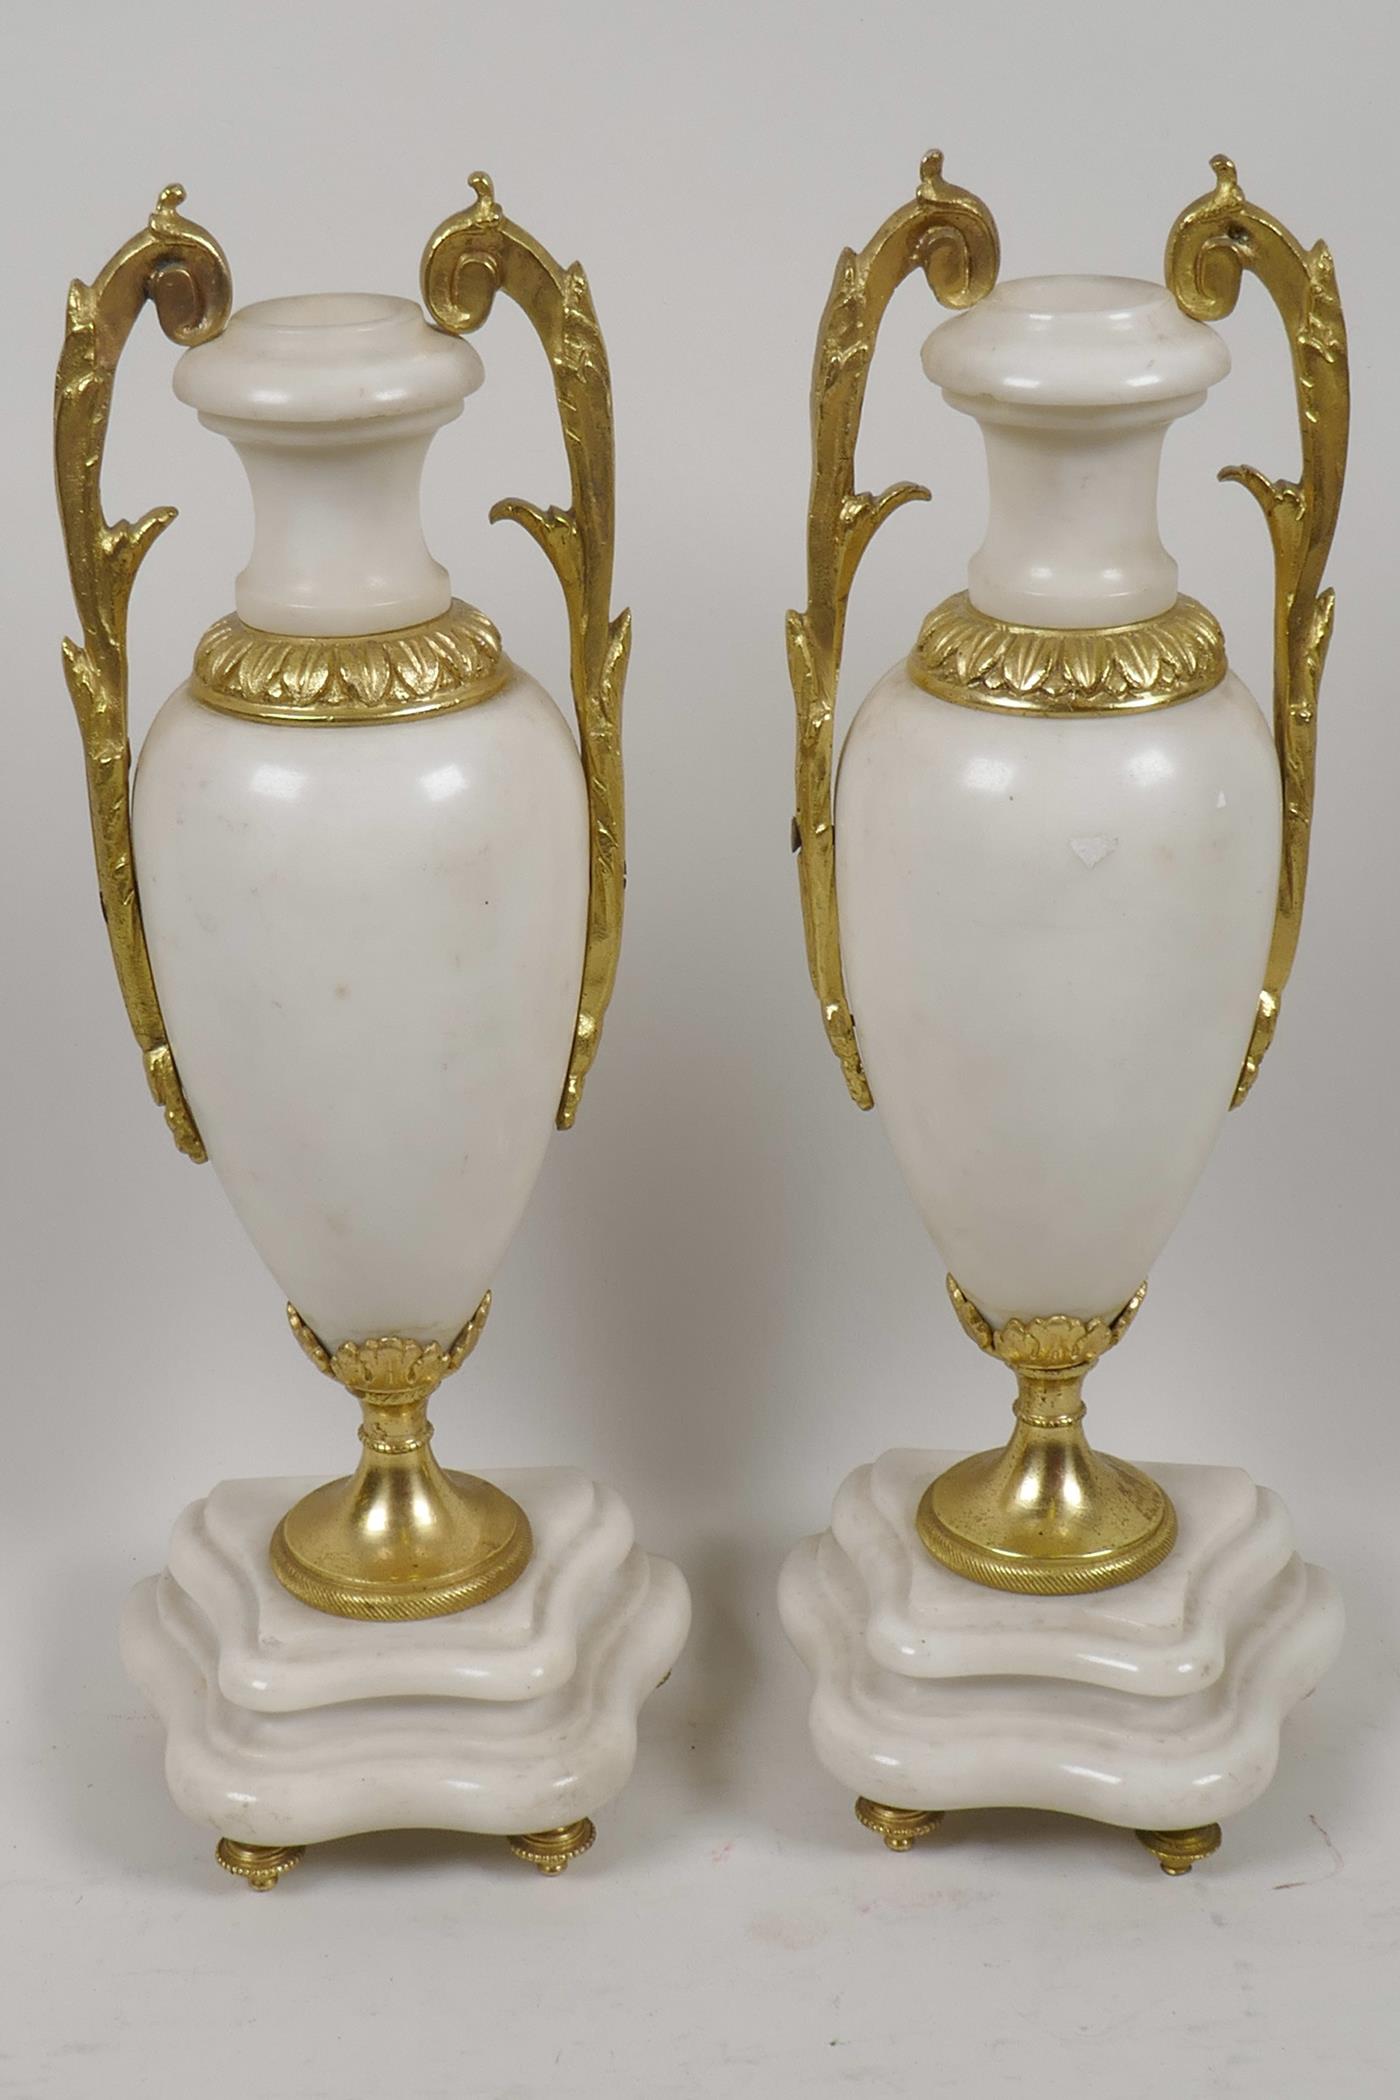 A pair of ormolu mounted white marble side urns on shaped plinth bases, 10½" high